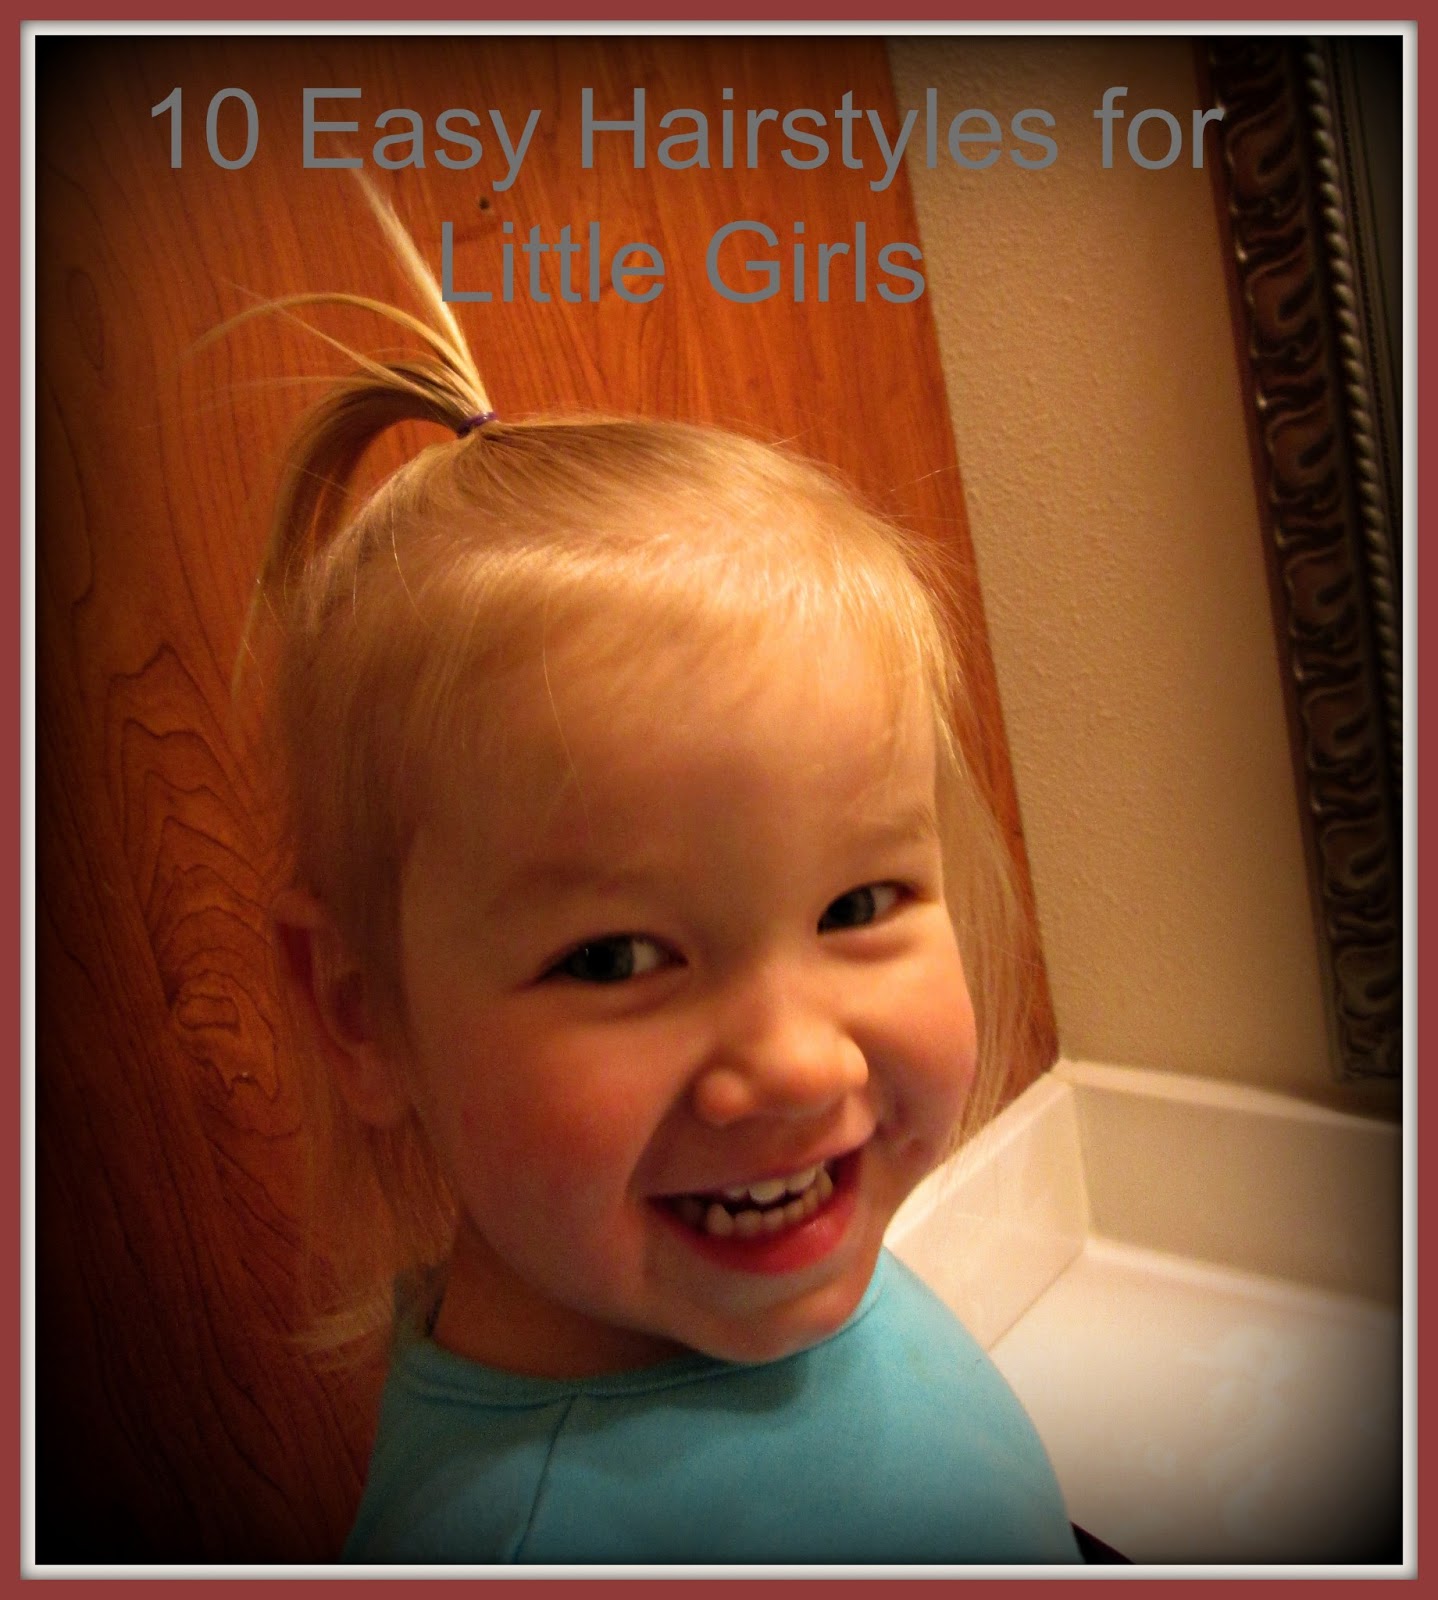 THE REHOMESTEADERS: 10 Easy Hairstyles for Little Girls